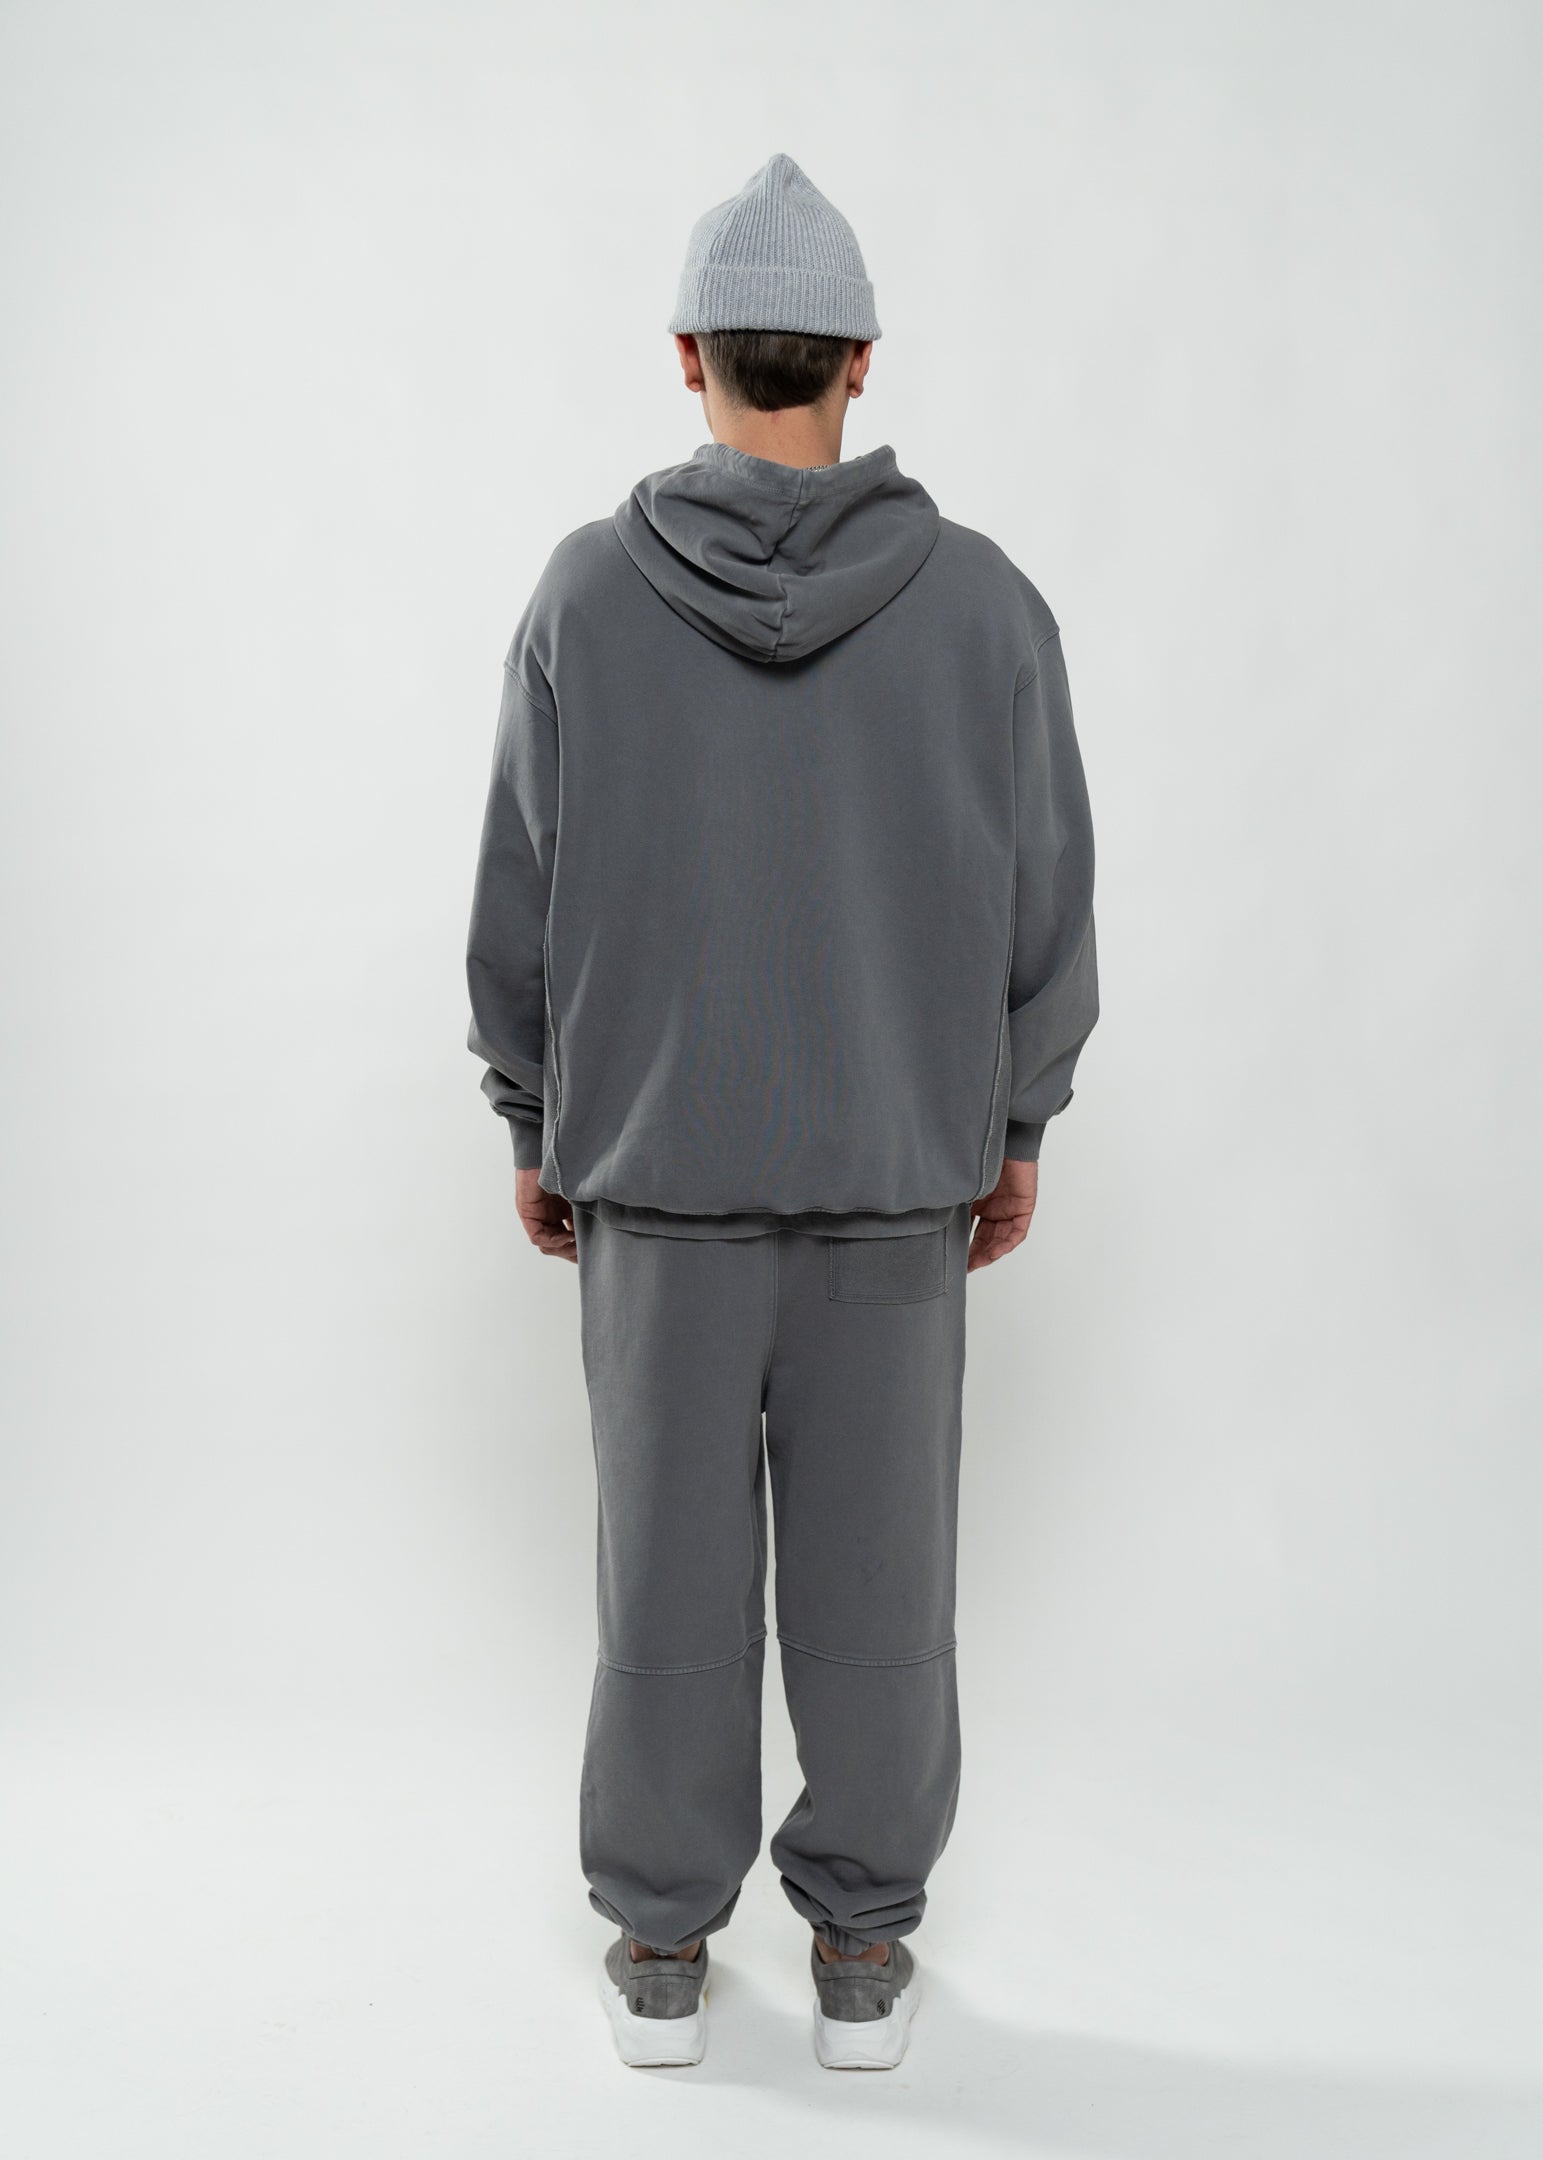 Flowers for Society Basic Jogger pant washed grey backview worn by model Ben standing